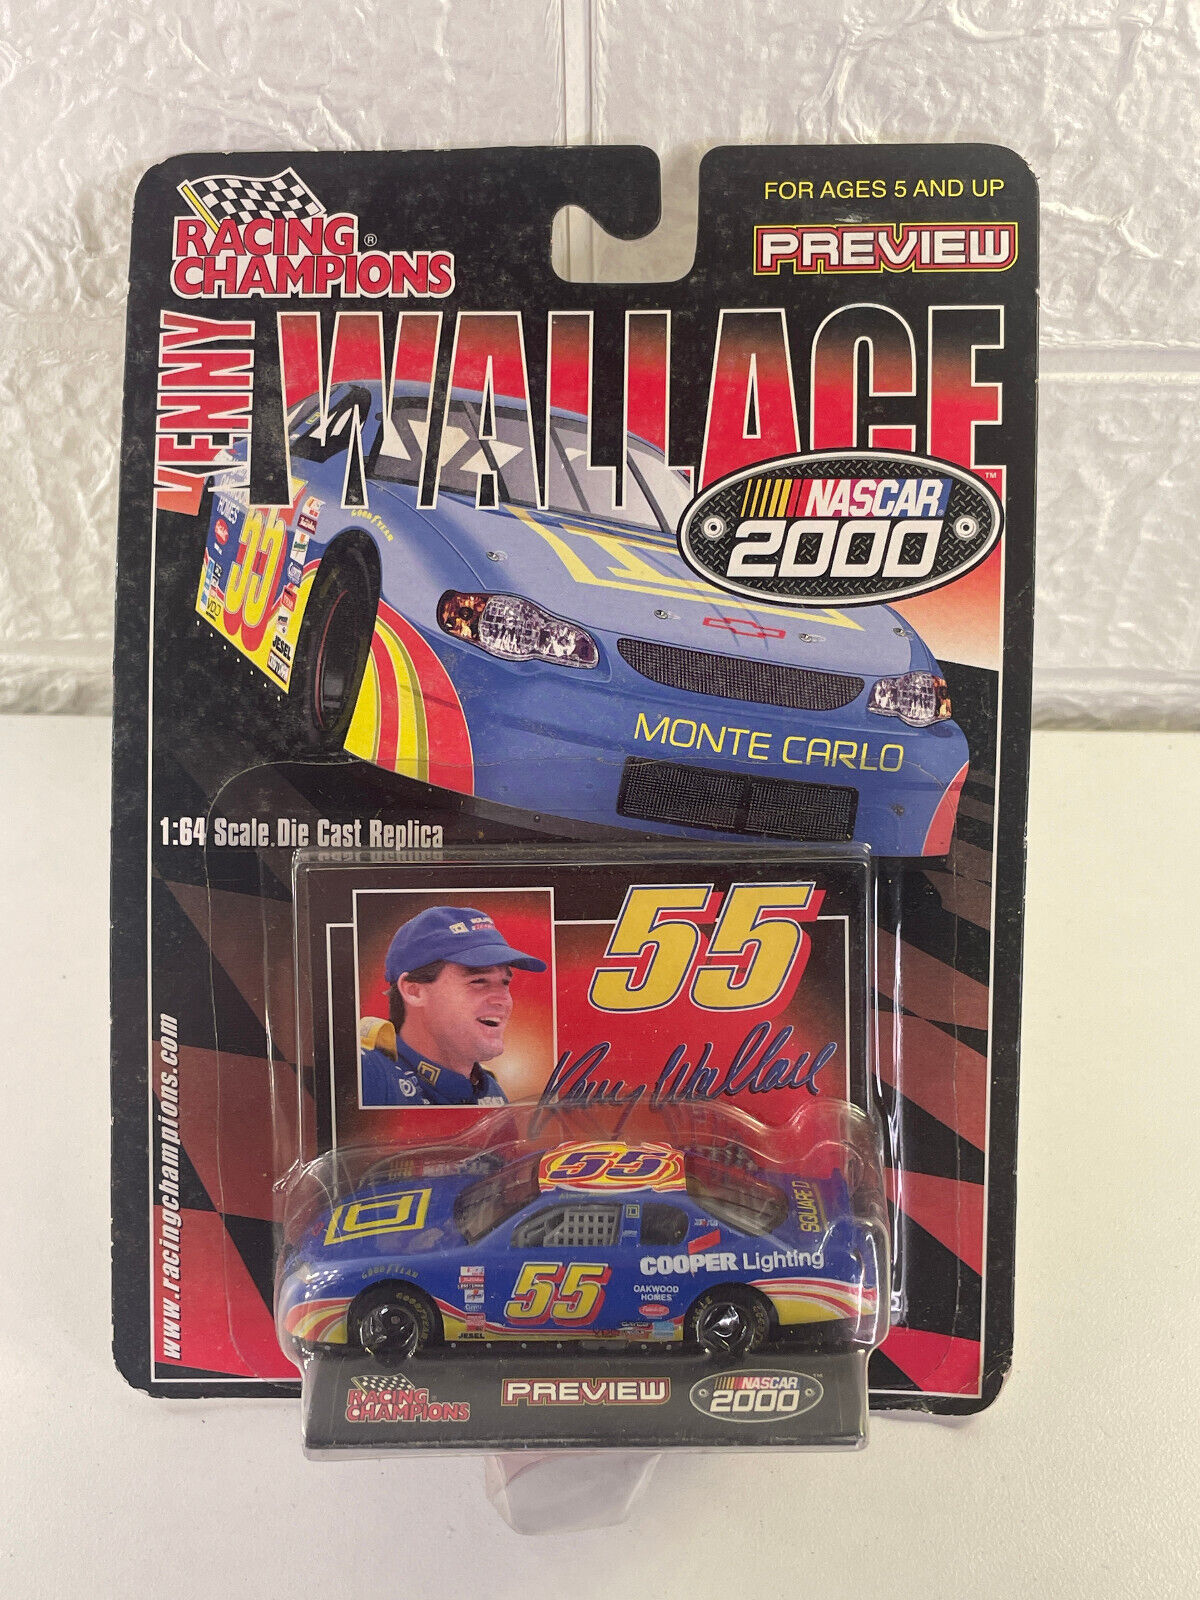 RACING CHAMPIONS KENNY WALLACE NASCAR 2000 1:64 SCALE DIE-CAST REPLICA - $9.89